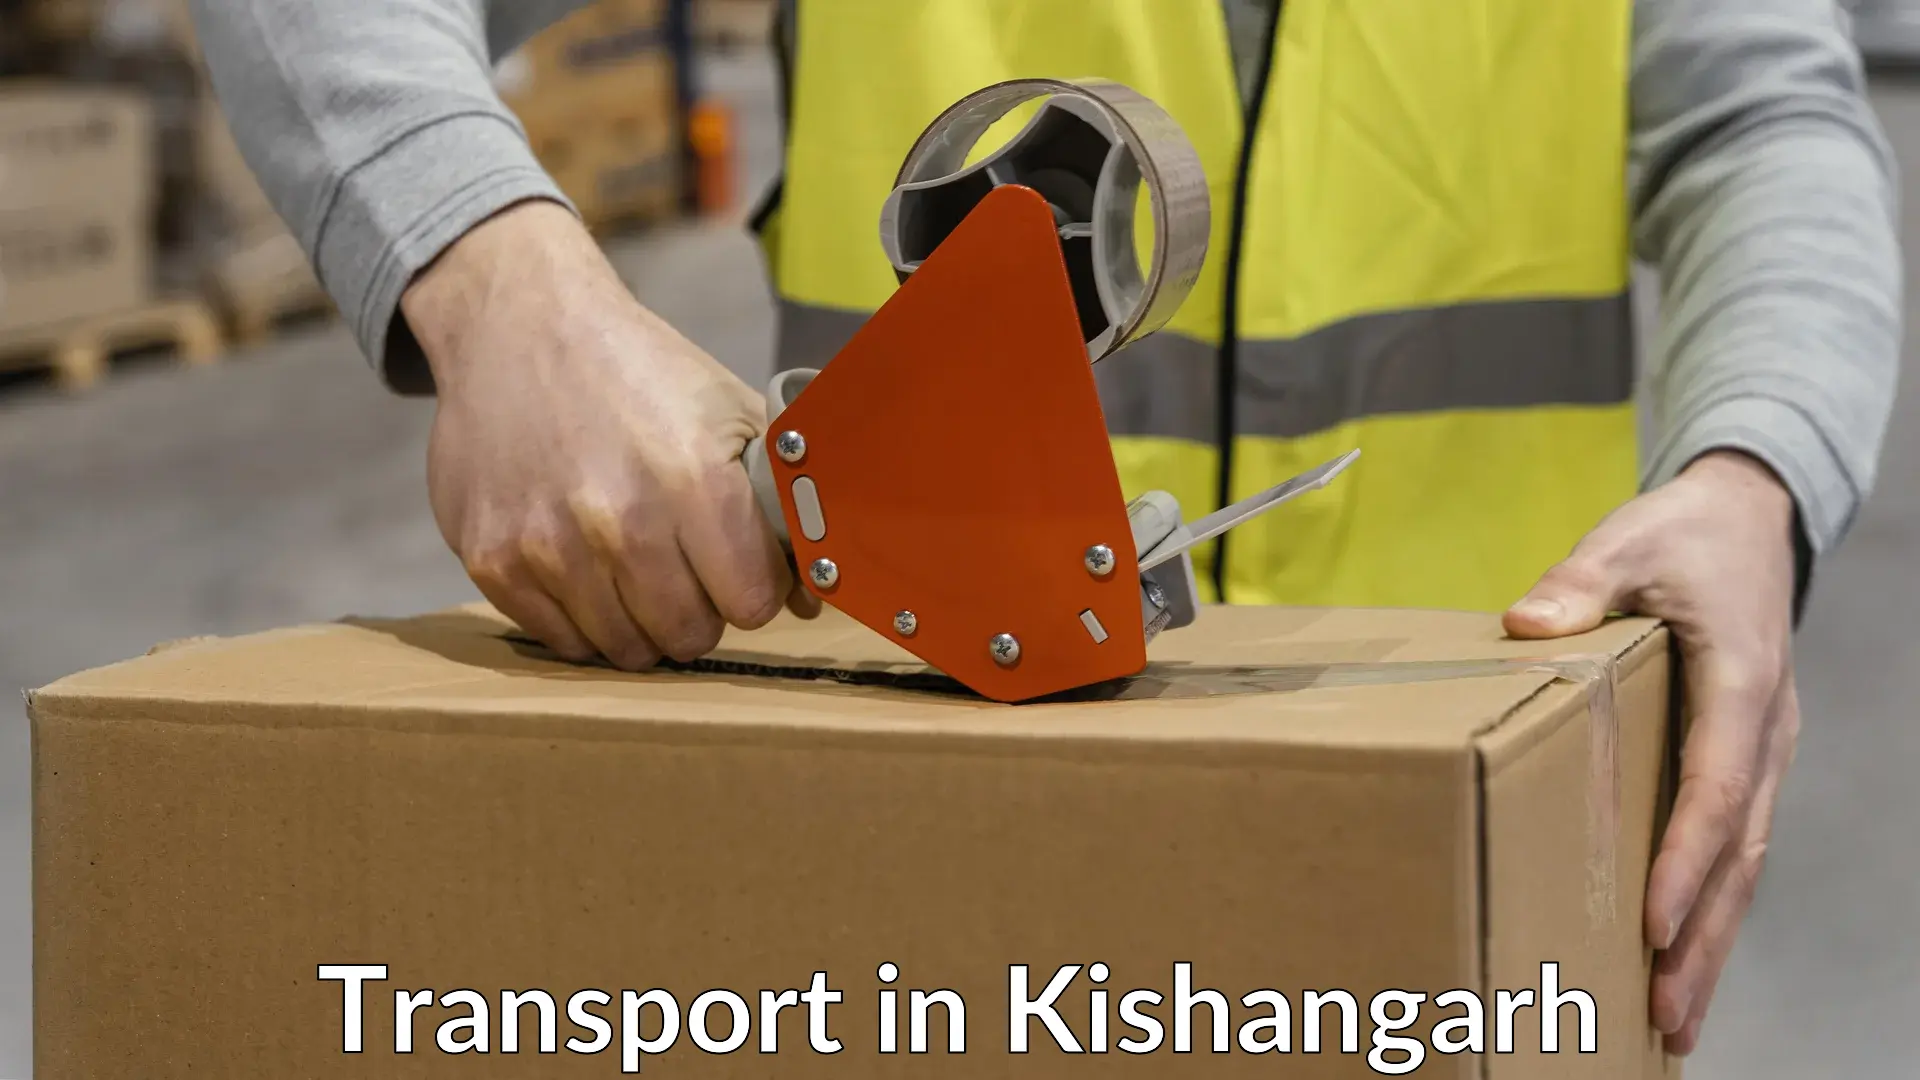 Transport shared services in Kishangarh